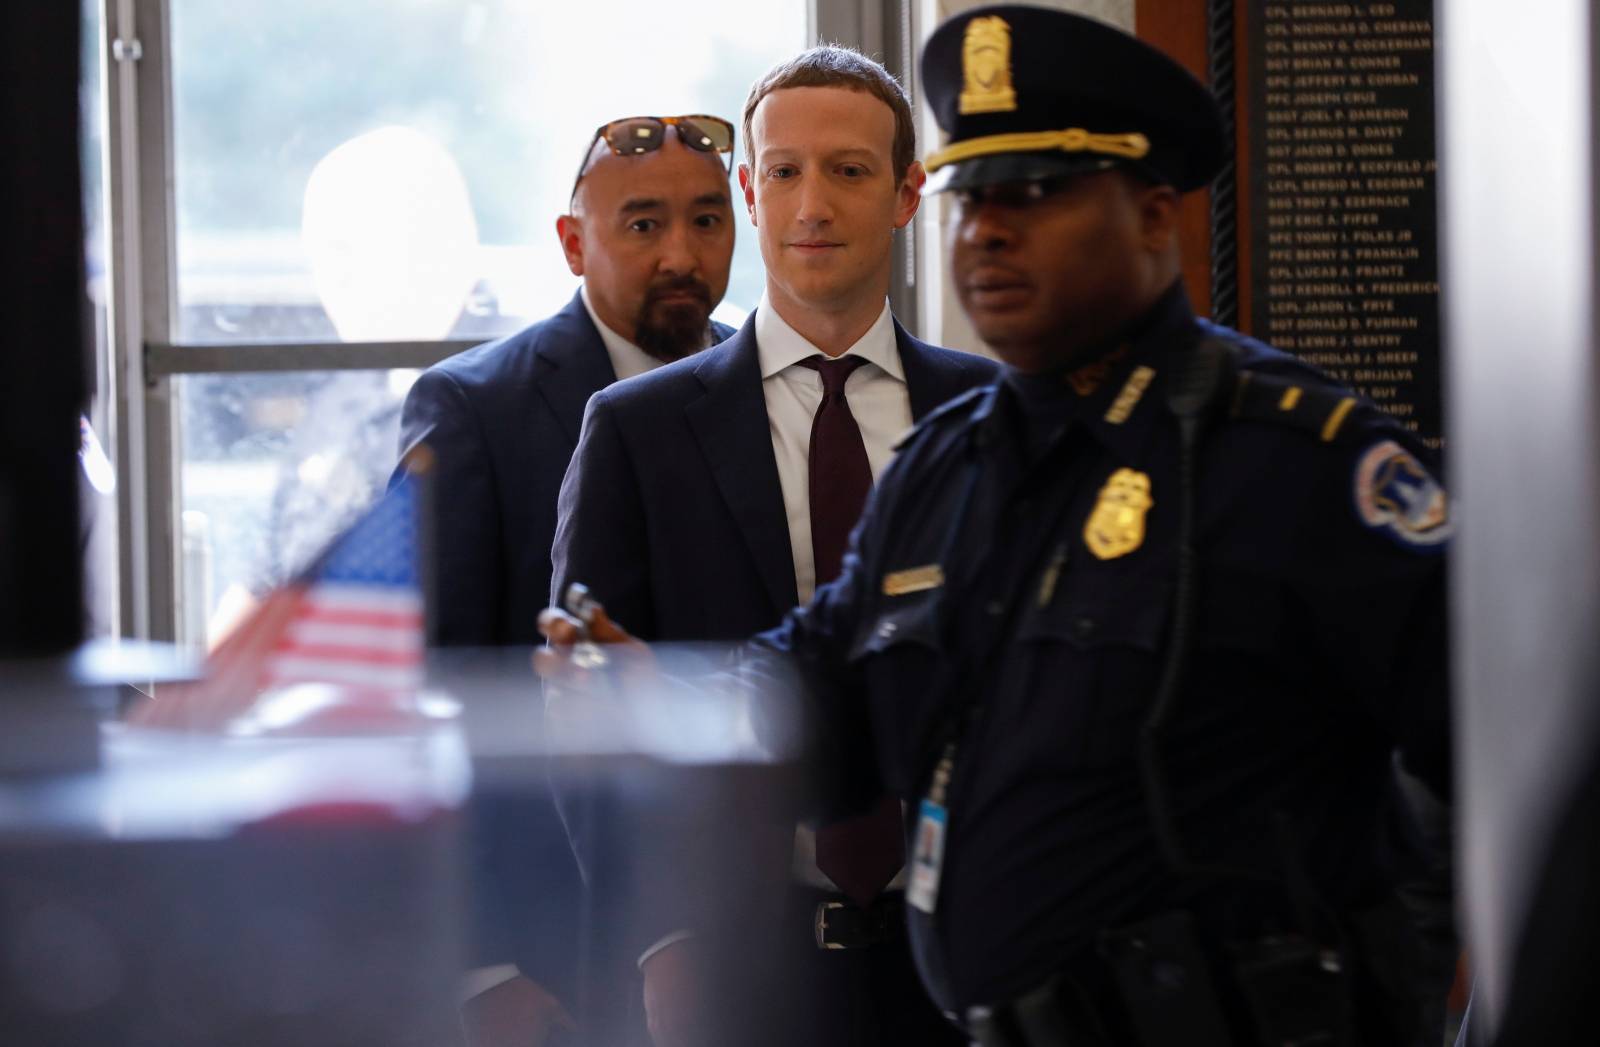 Facebook CEO Zuckerberg arrives to testify at House Financial Services Committee hearing on Capitol Hill in Washington